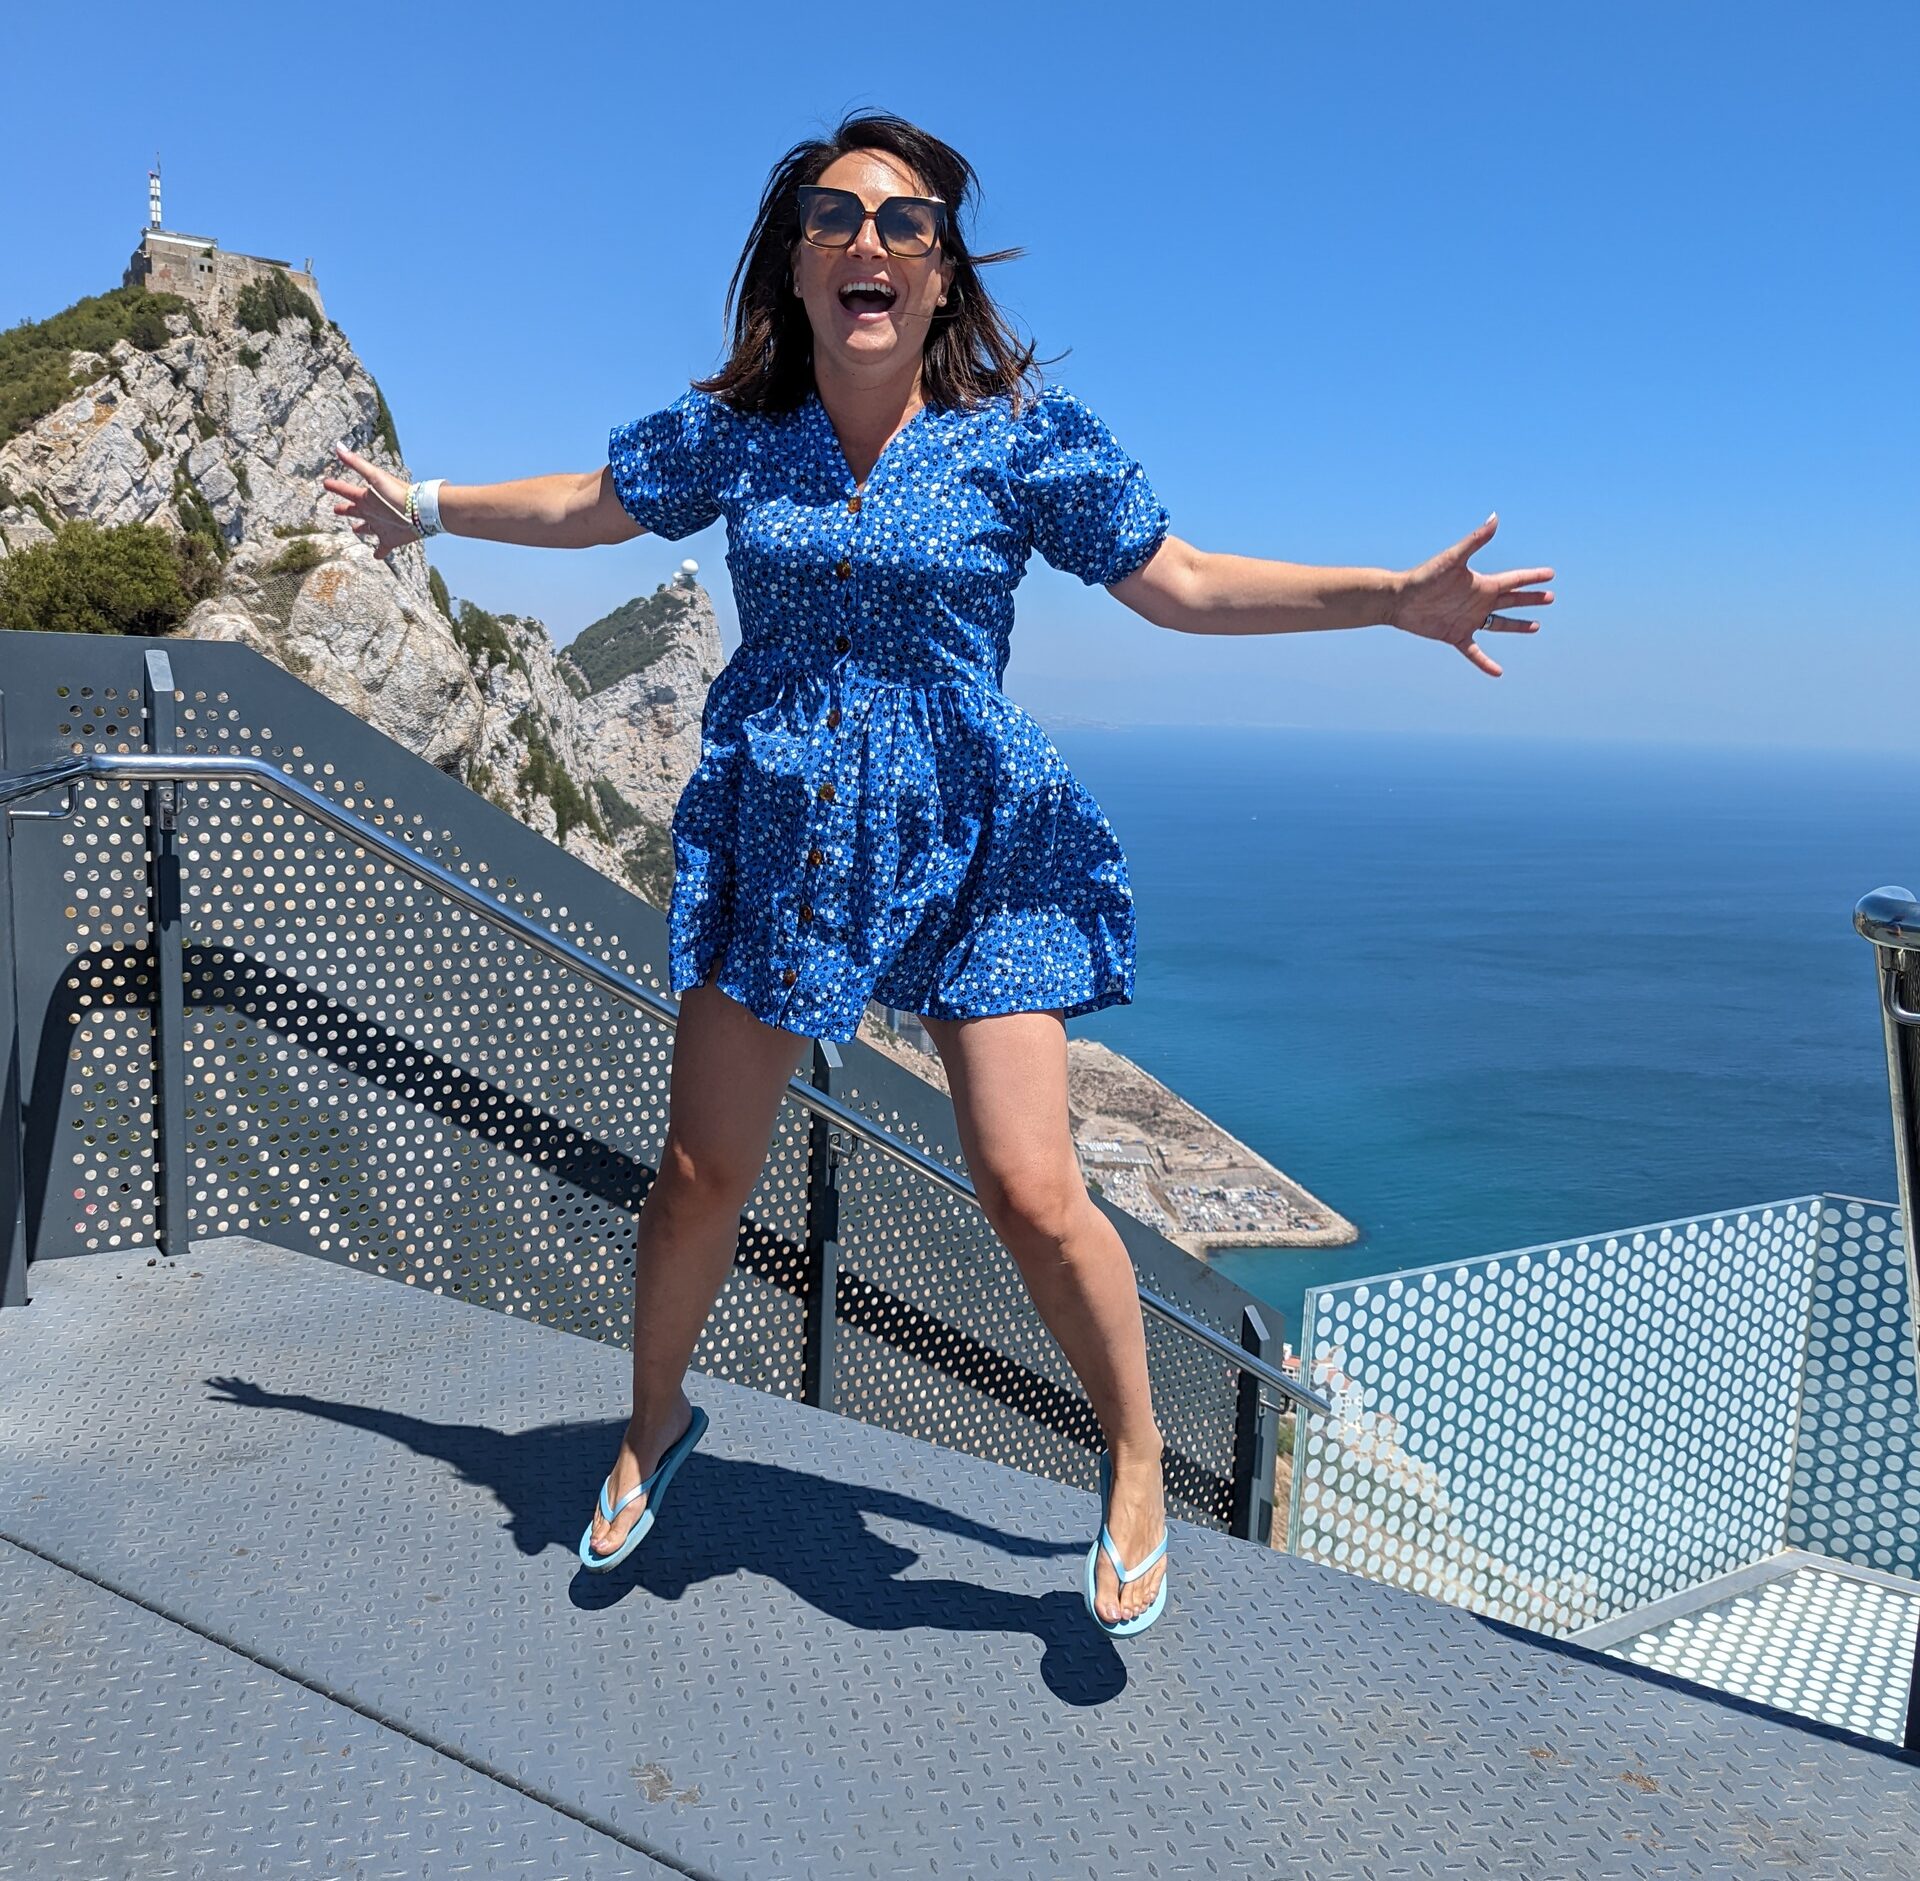 Lady jumping in Gibraltar